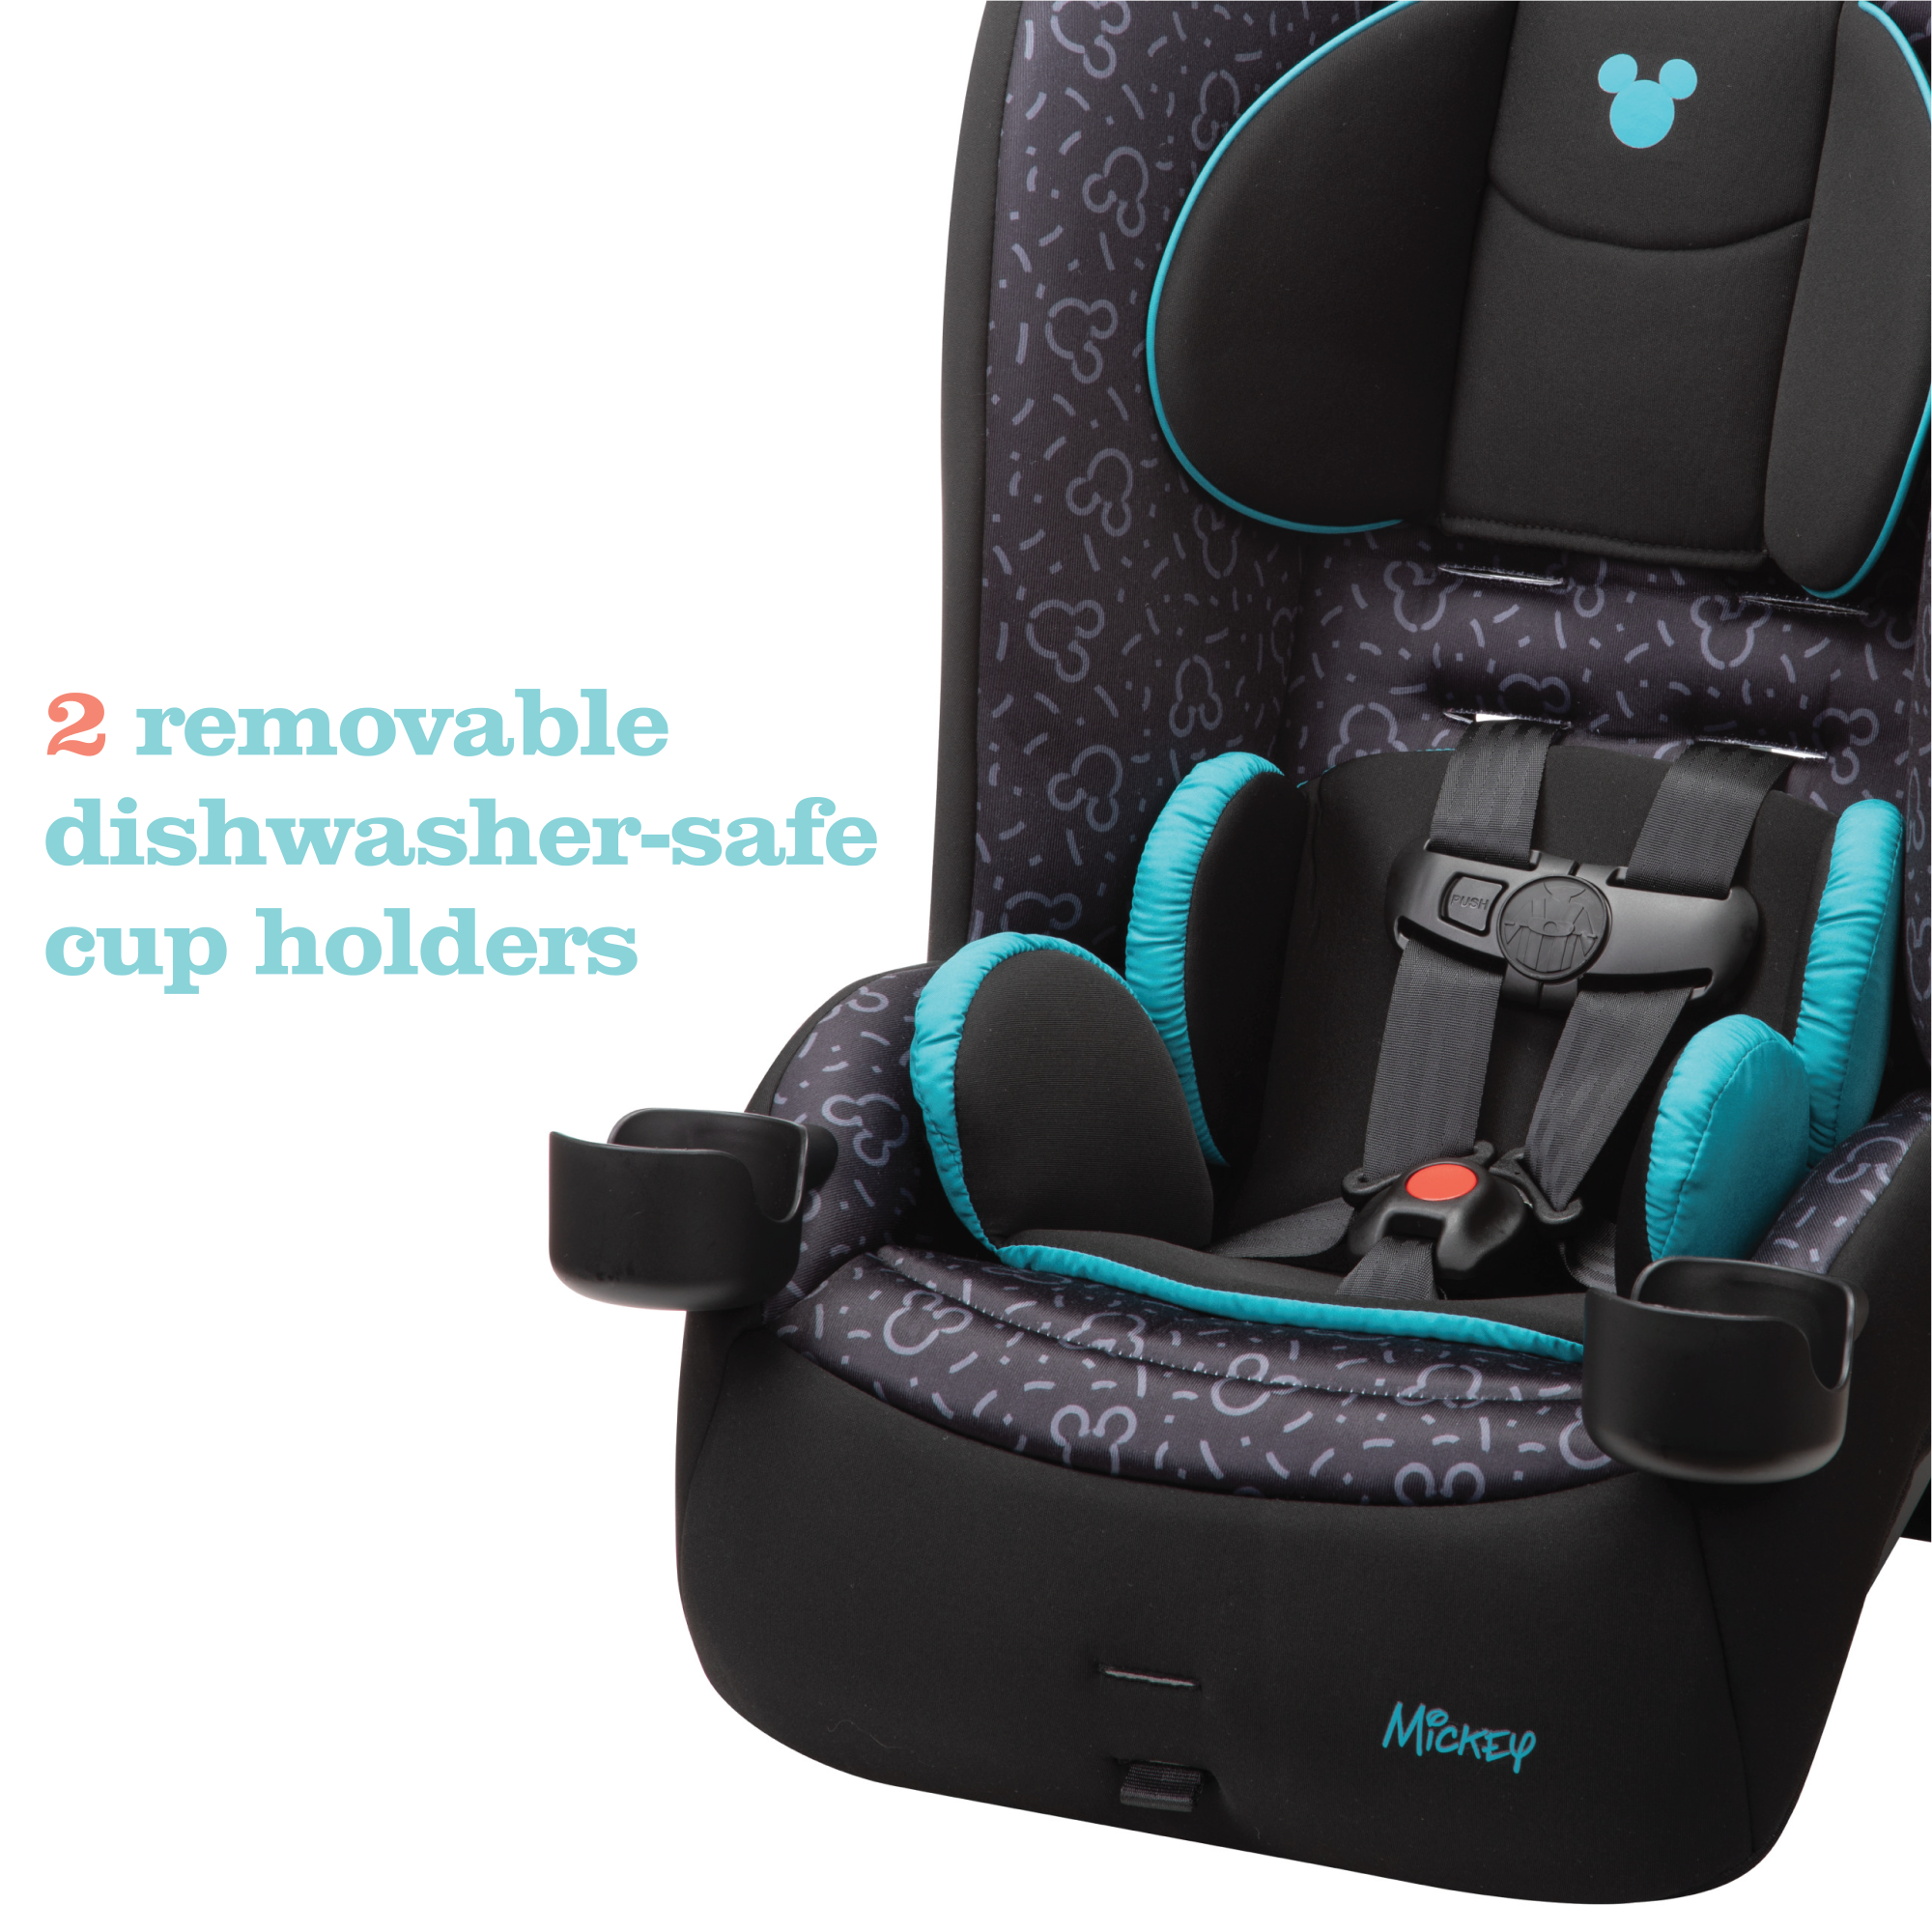 Disney Baby Jive 2-in-1 Convertible Car Seat - 2 removable dishwasher-safe cup holders